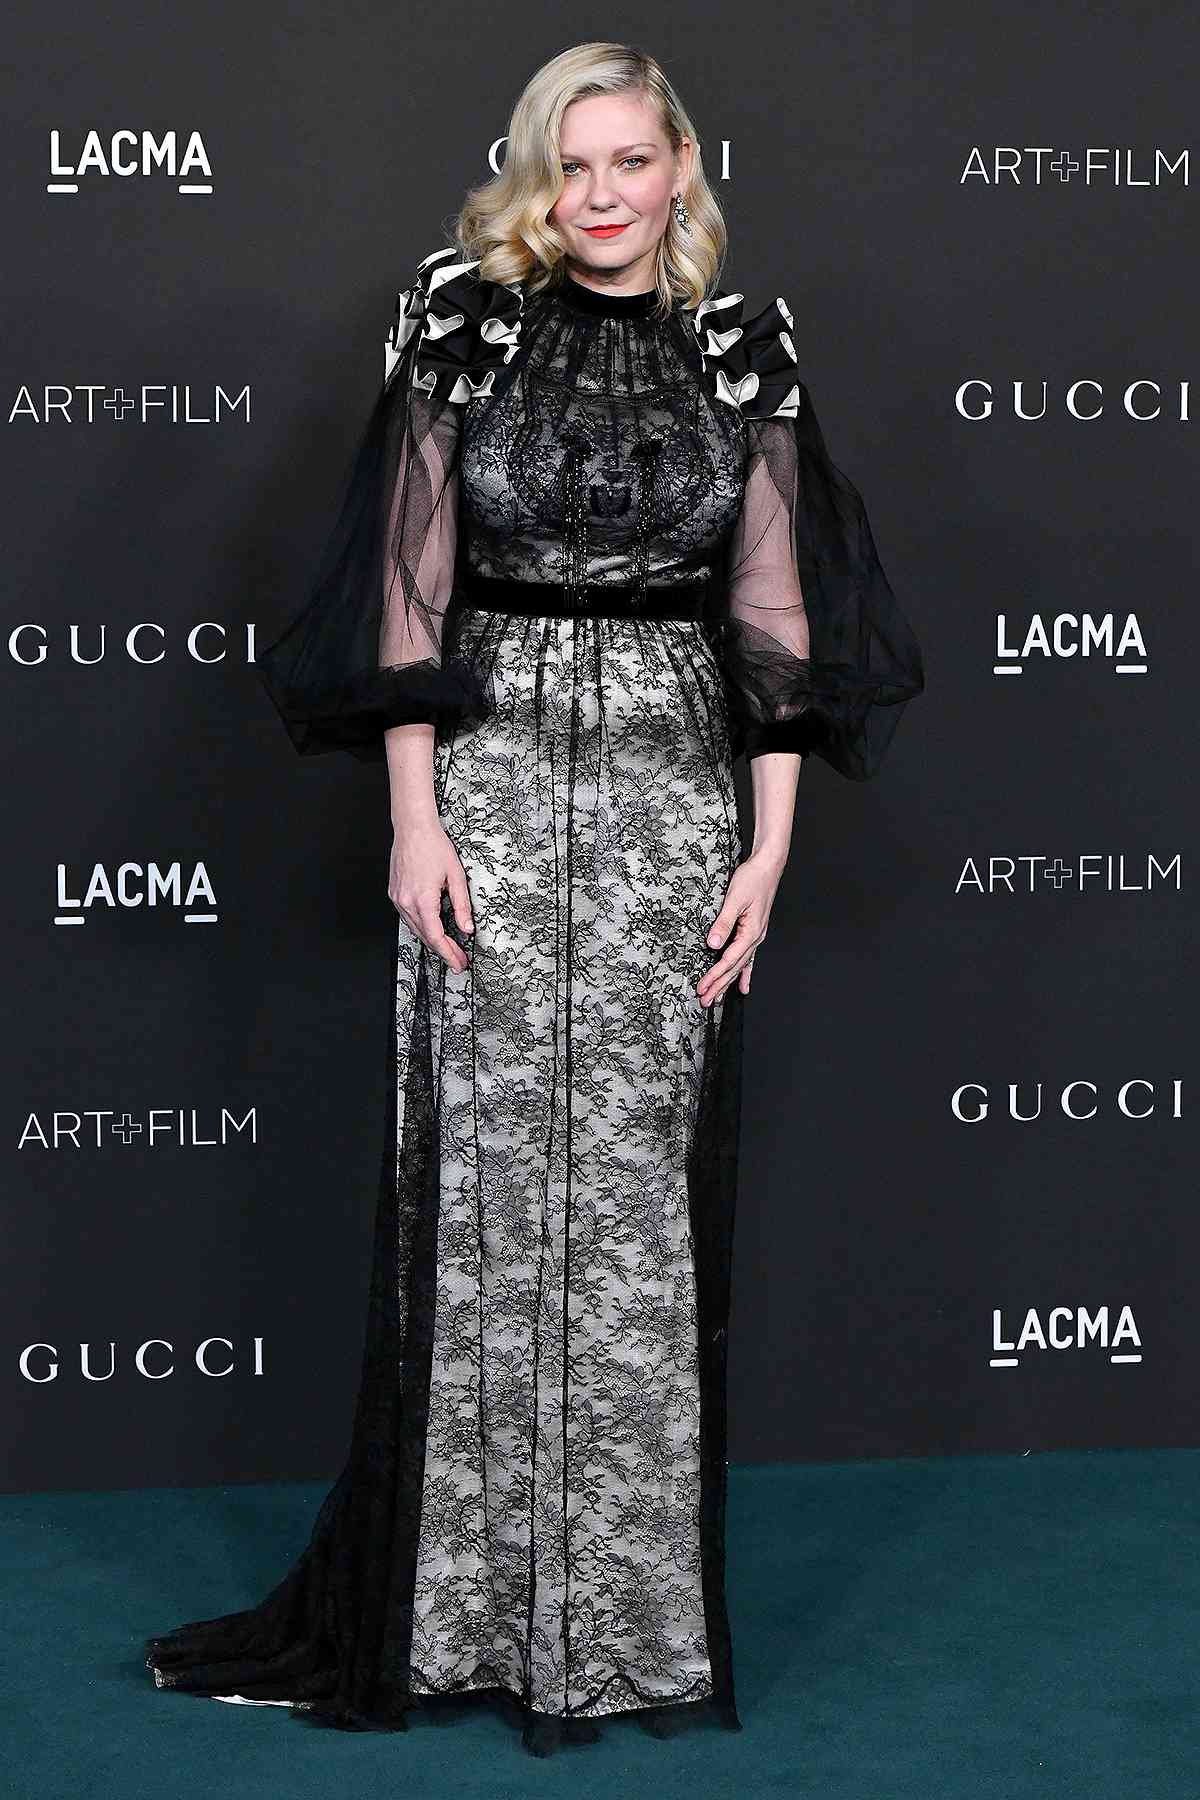 Kirsten Dunst attends the 10th Annual LACMA Art+Film Gala presented by Gucci at Los Angeles County Museum of Art on November 06, 2021